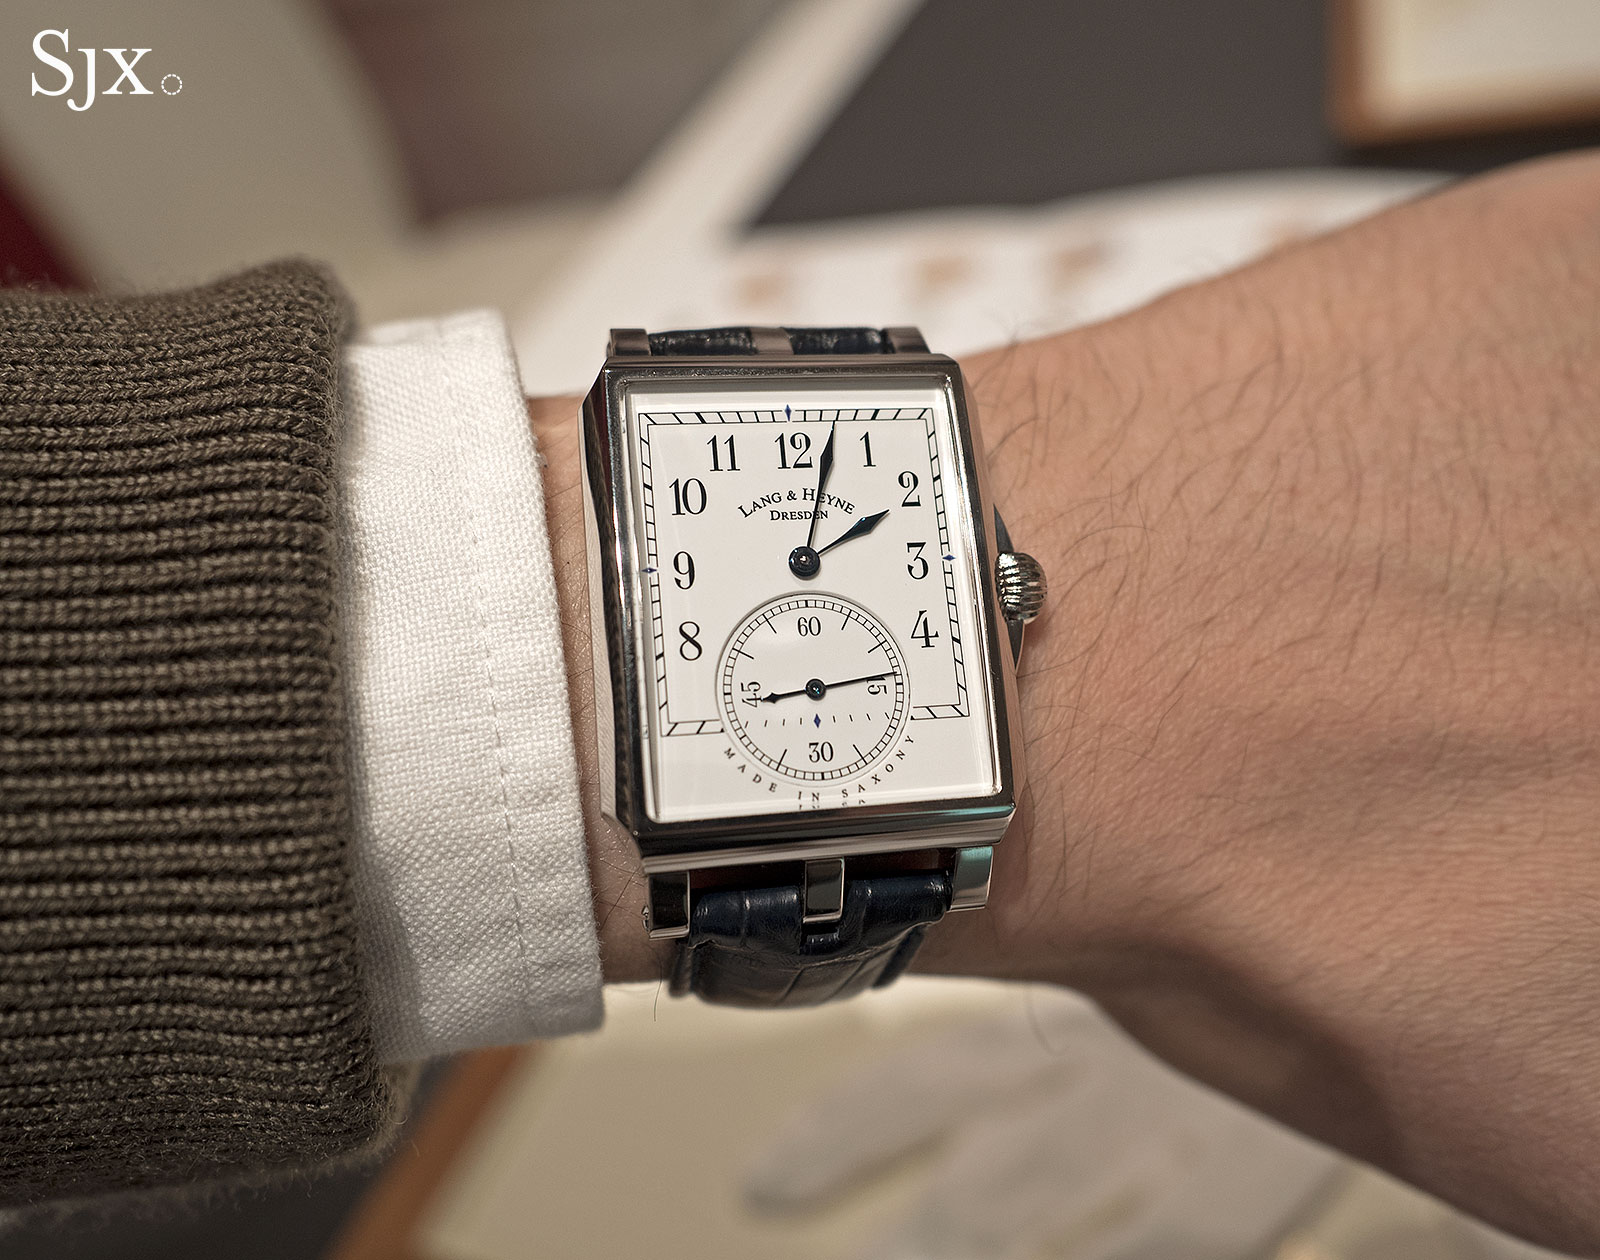 Hands-On with the Lang & Heyne Georg, Powered by a New, Splendid ...